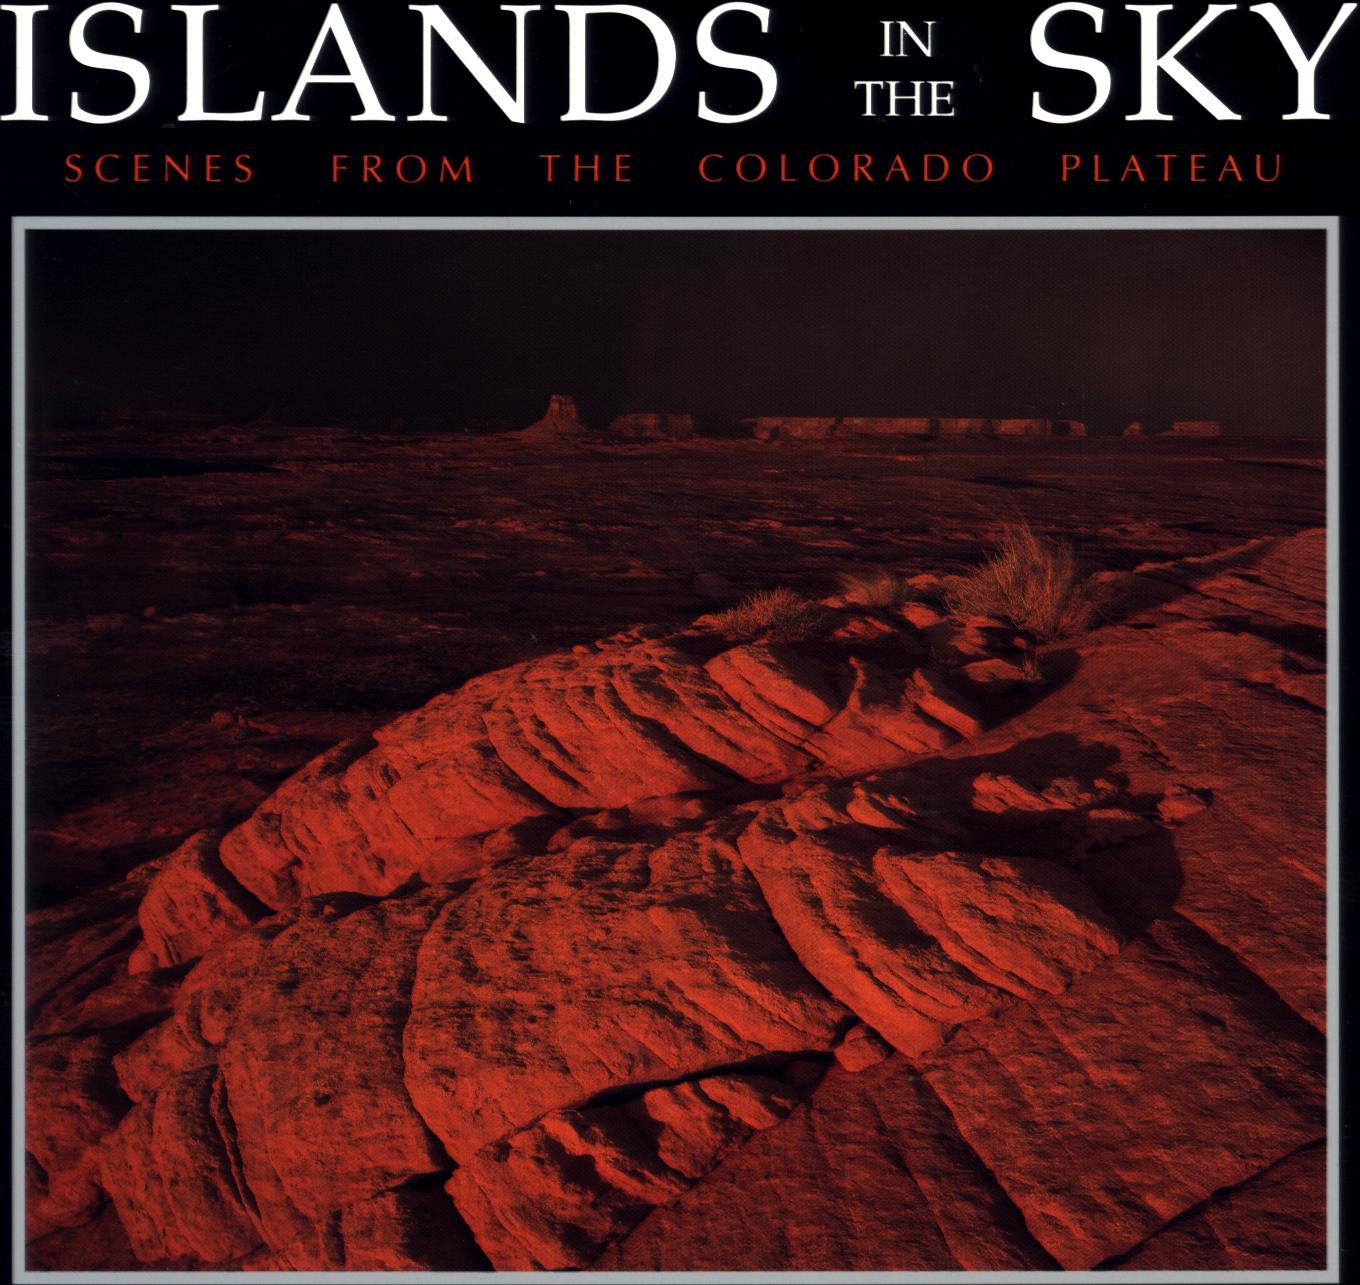 ISLANDS IN THE SKY: scenes from the Colorado Plateau. A Wish-You-Were-Here Book. 